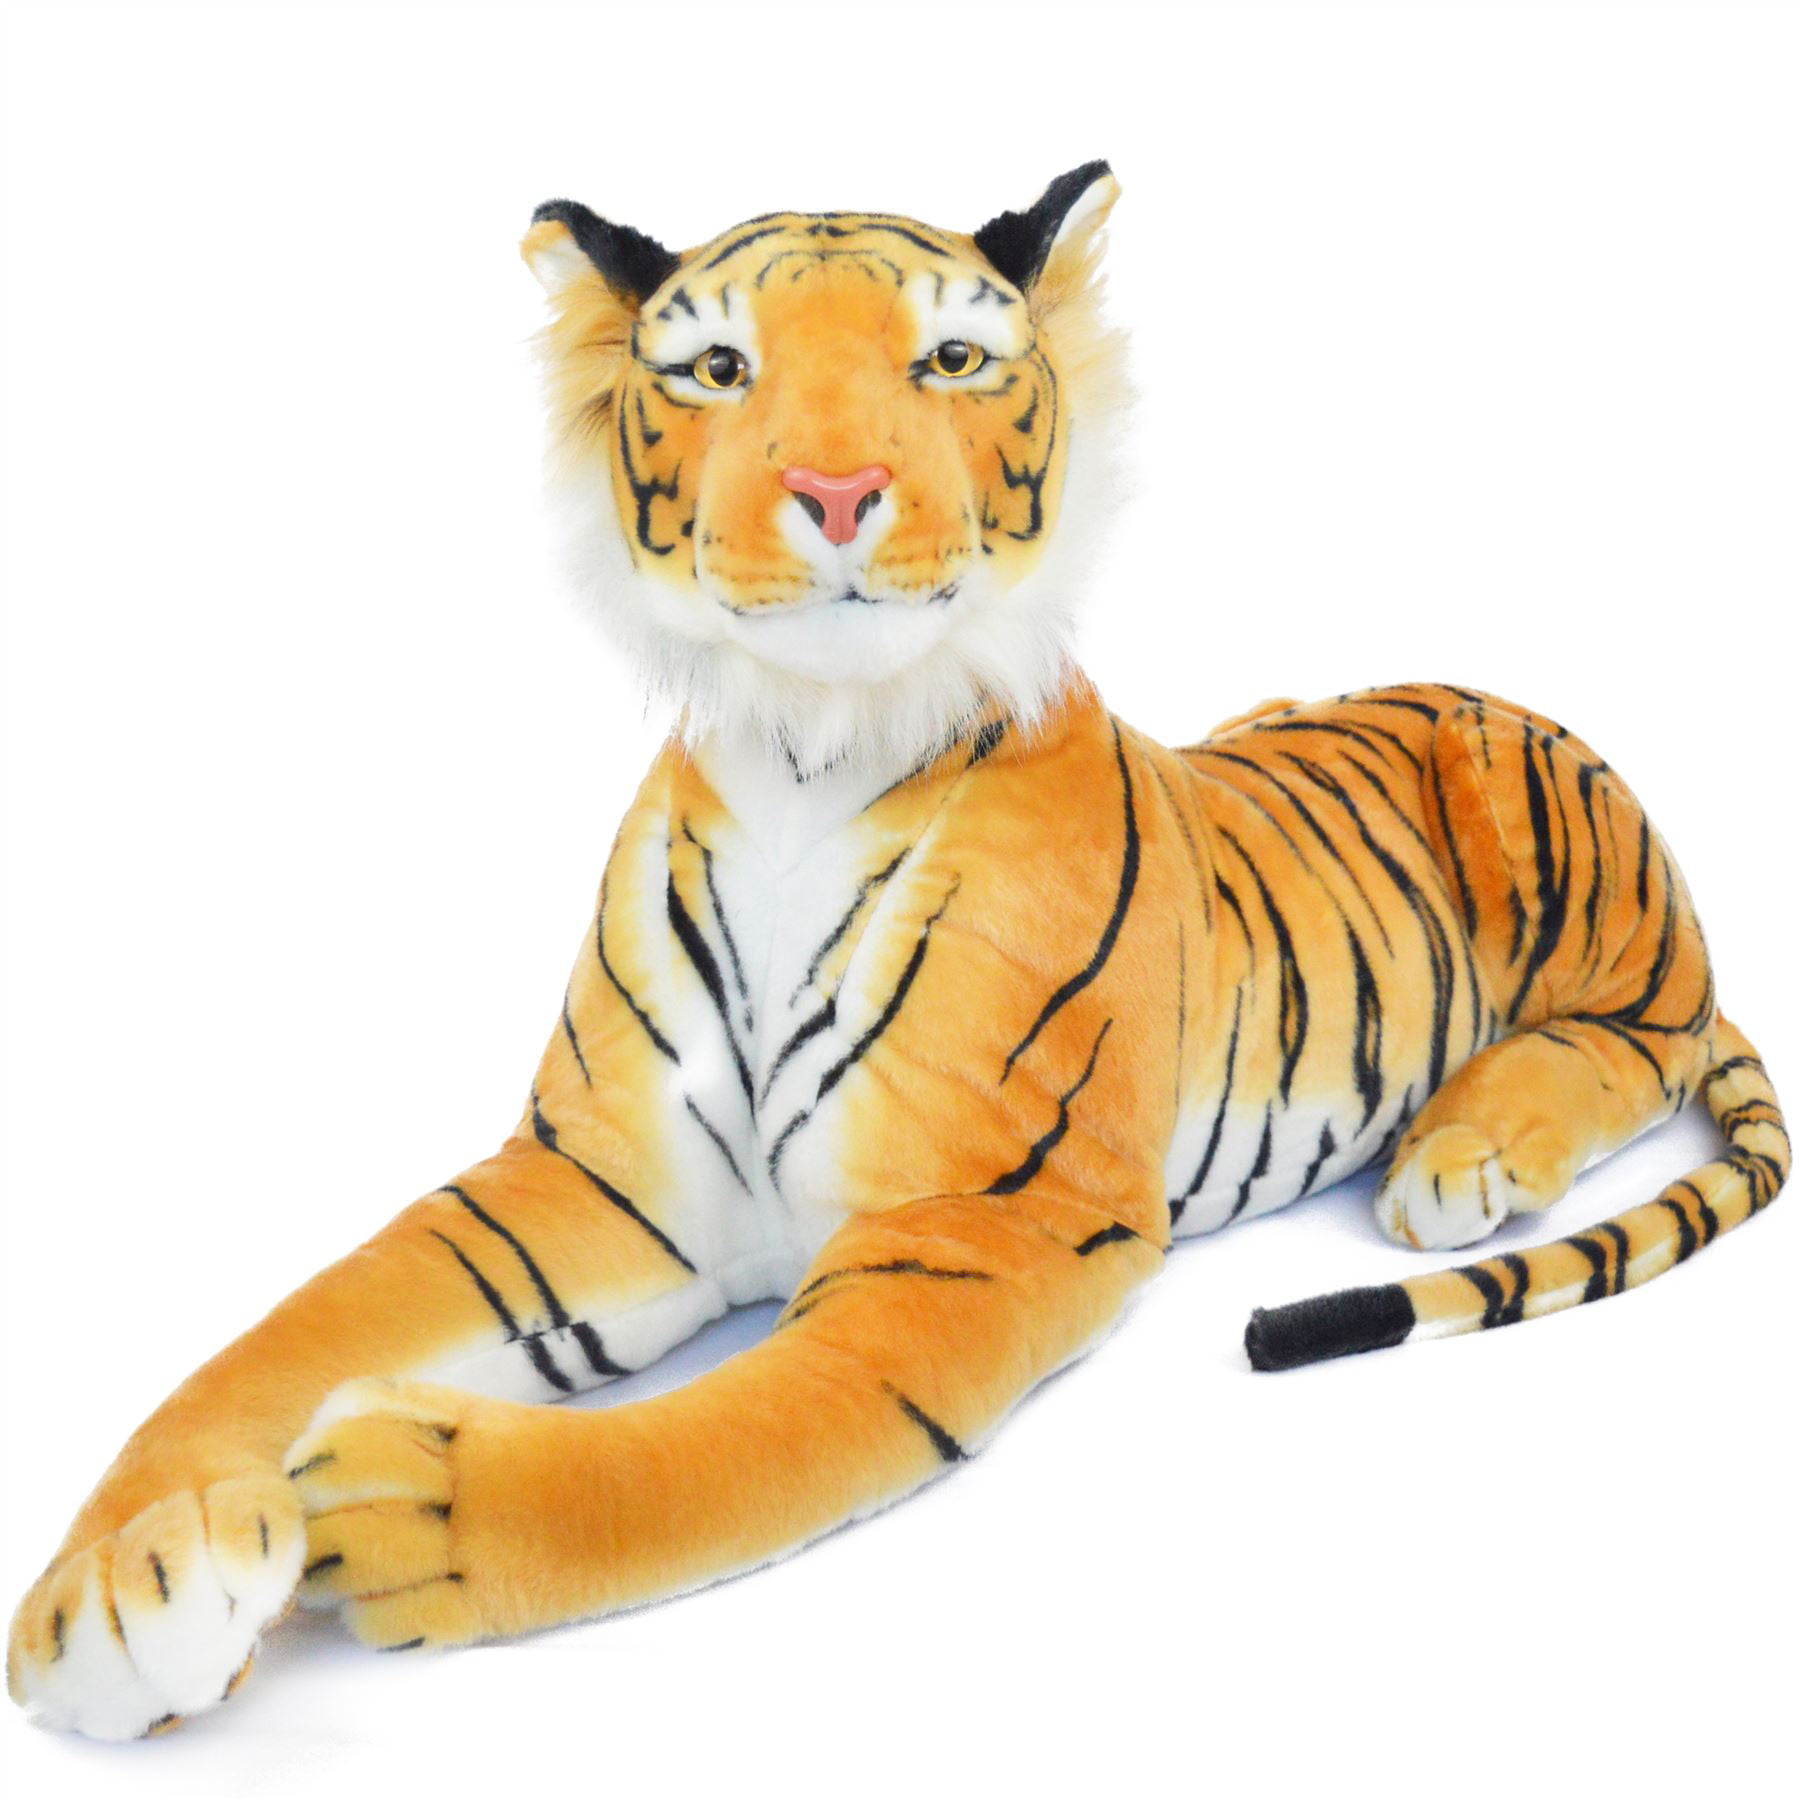 Arrow The Tiger20 Inch Stuffed Animal Plush Cat by Tale Toys for sale online 